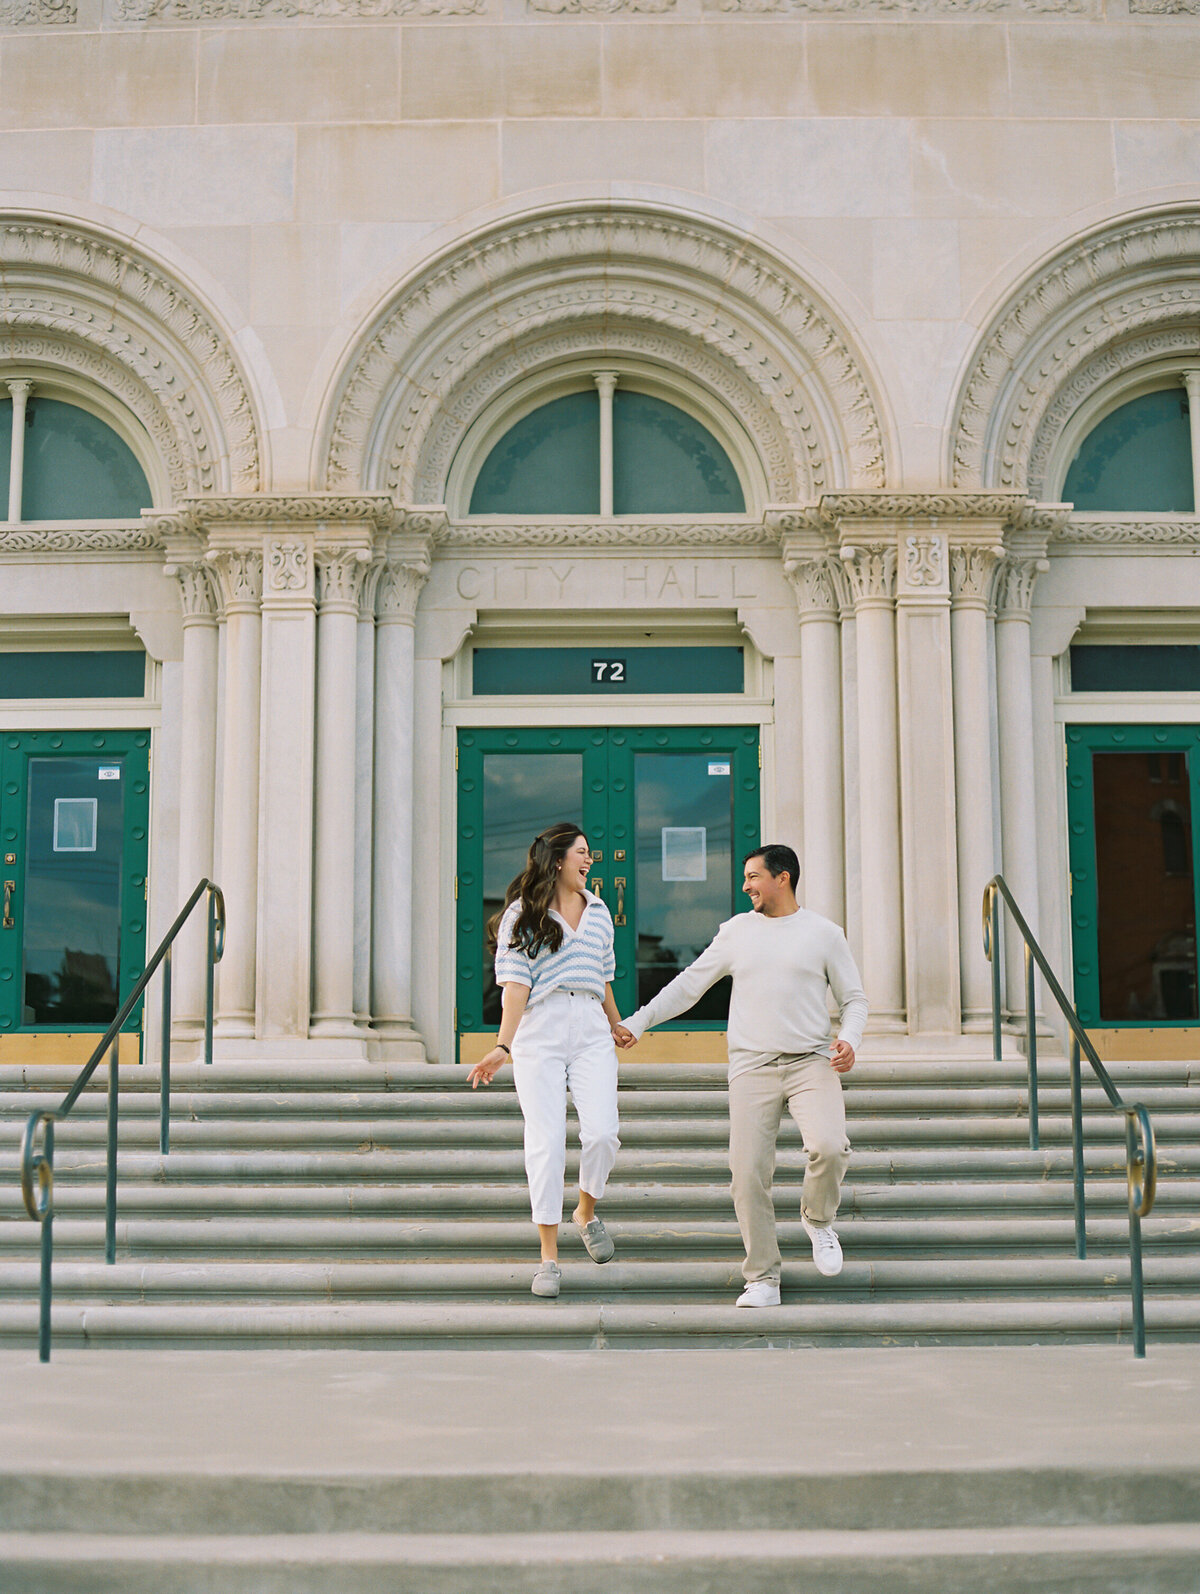 Man and woman holding hands and walking down stairs outside of a large stone building